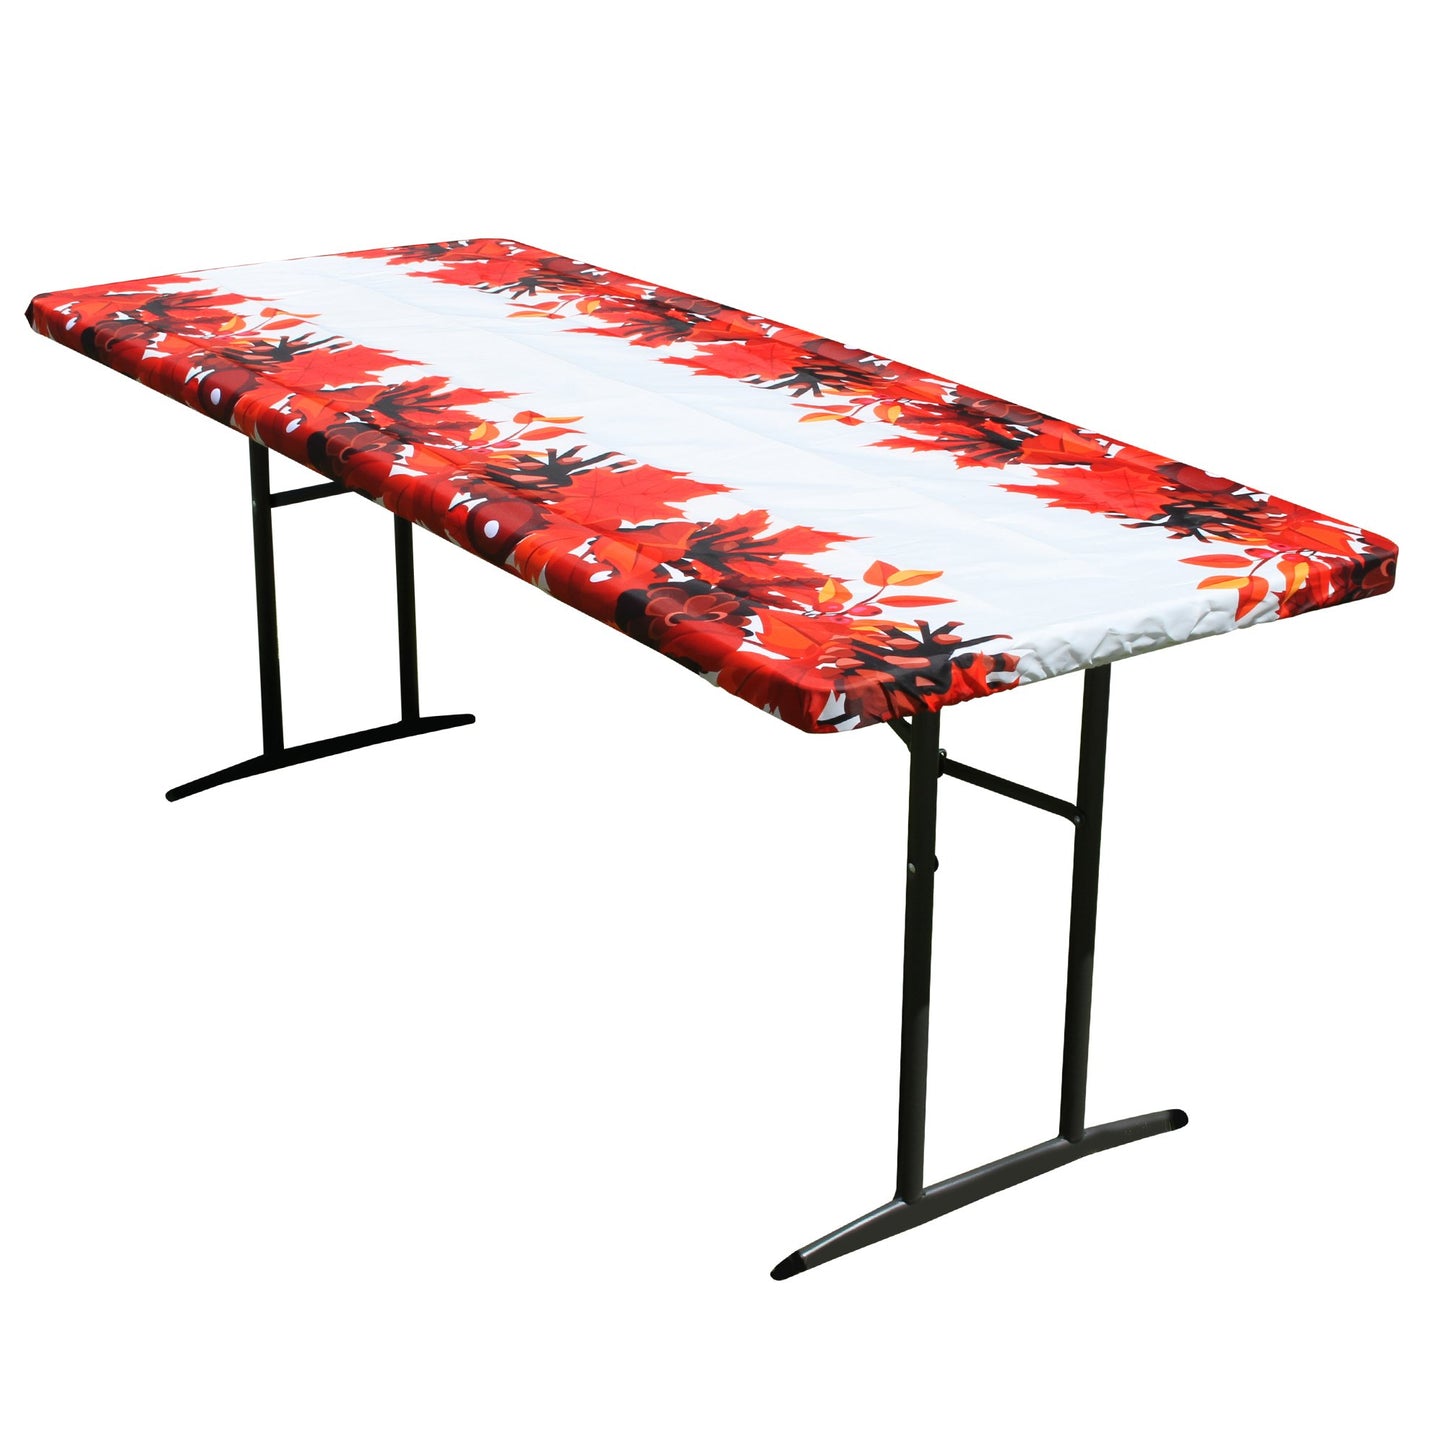 TableCloth PLUS 72" Fall Fitted Polyester Tablecloth for 6' Folding Tables displayed adorning a folding table